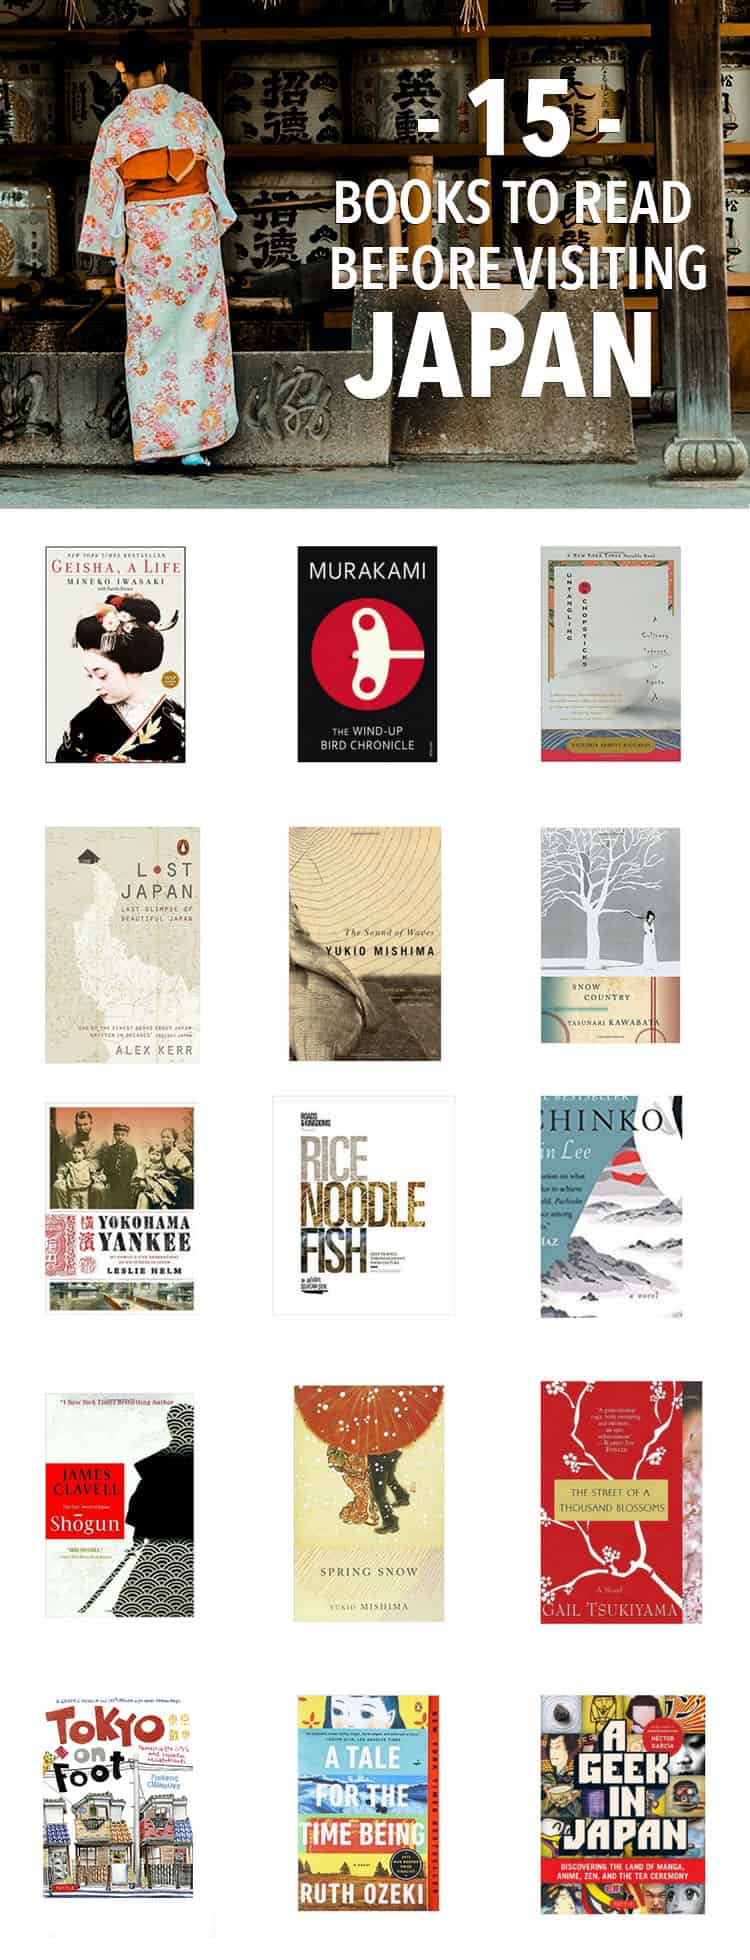 Before you visit, here are 15 fascinating books about Japan you must read!